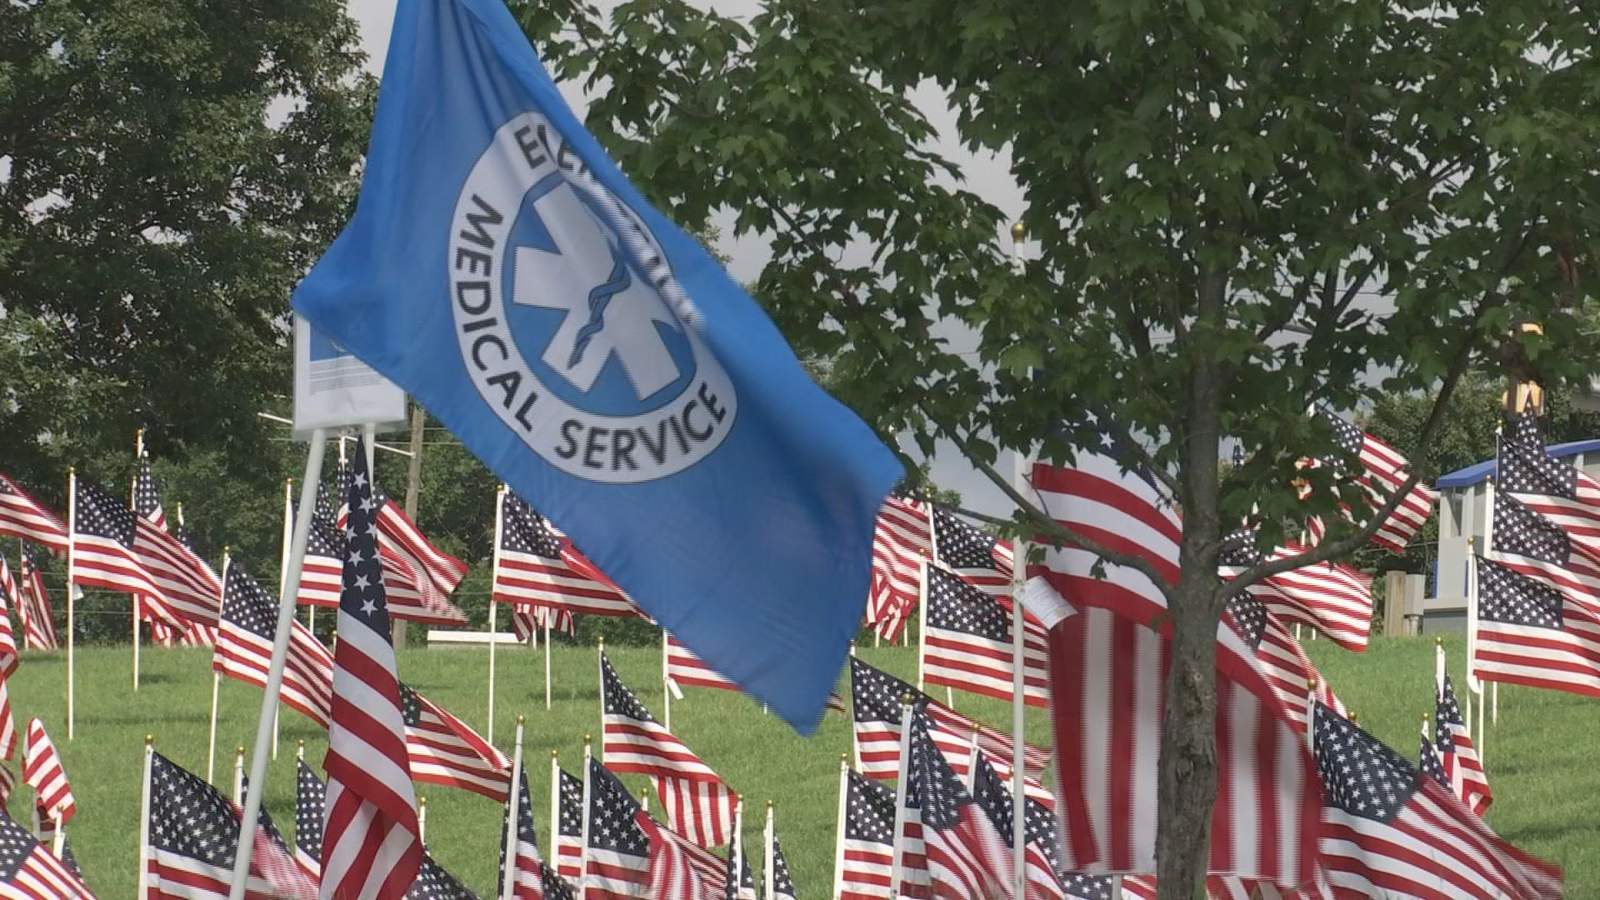 Lynchburg’s Field of Honor has a different look in 2020